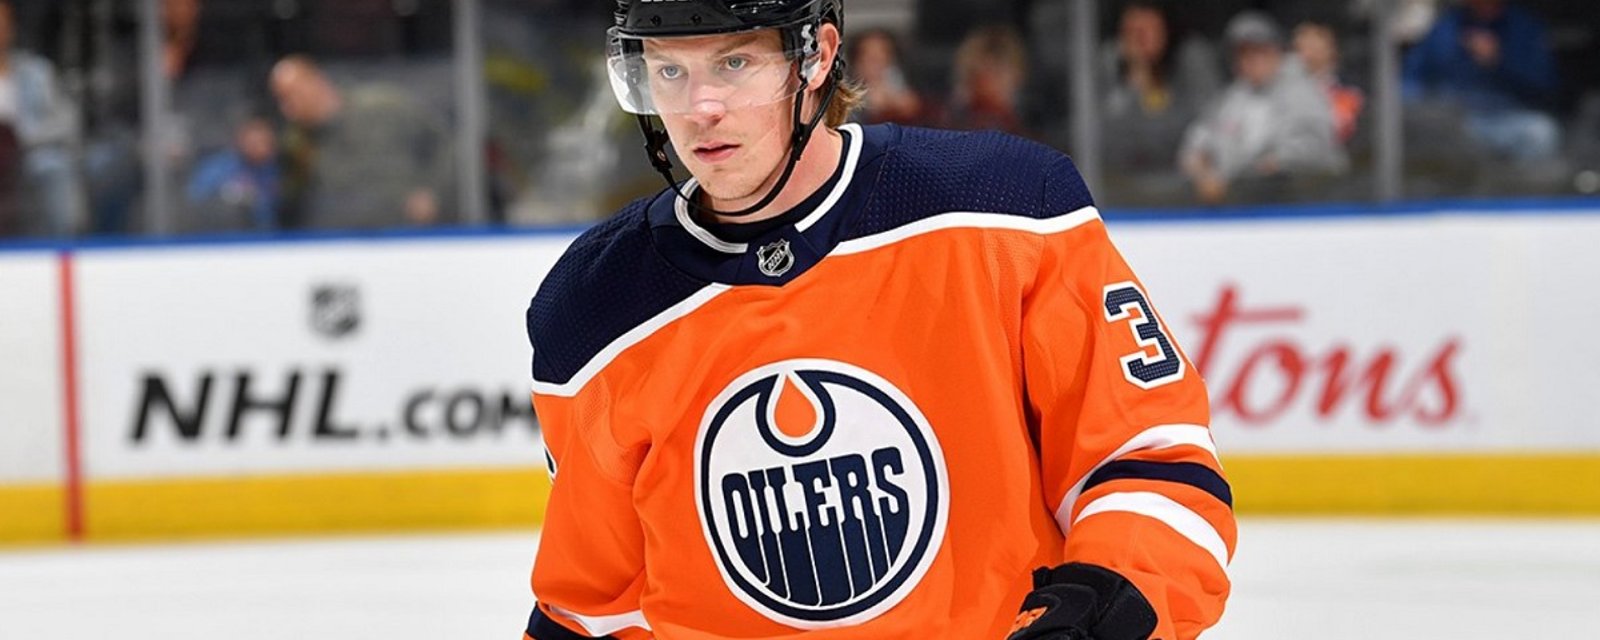 Oilers make 2 changes to the blue line ahead of Saturday night matchup.